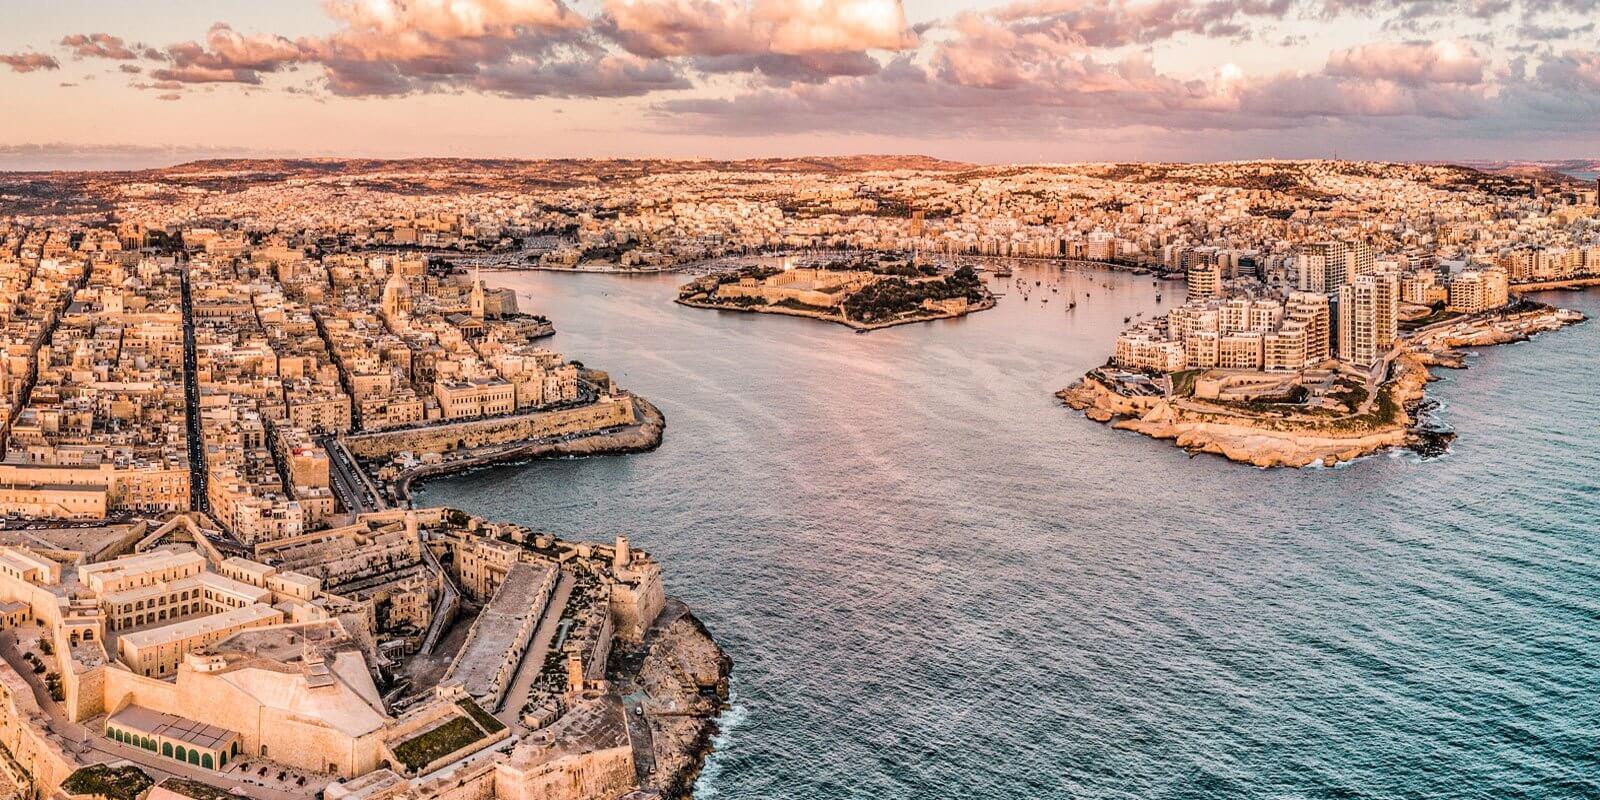 A view of Sliema from the water